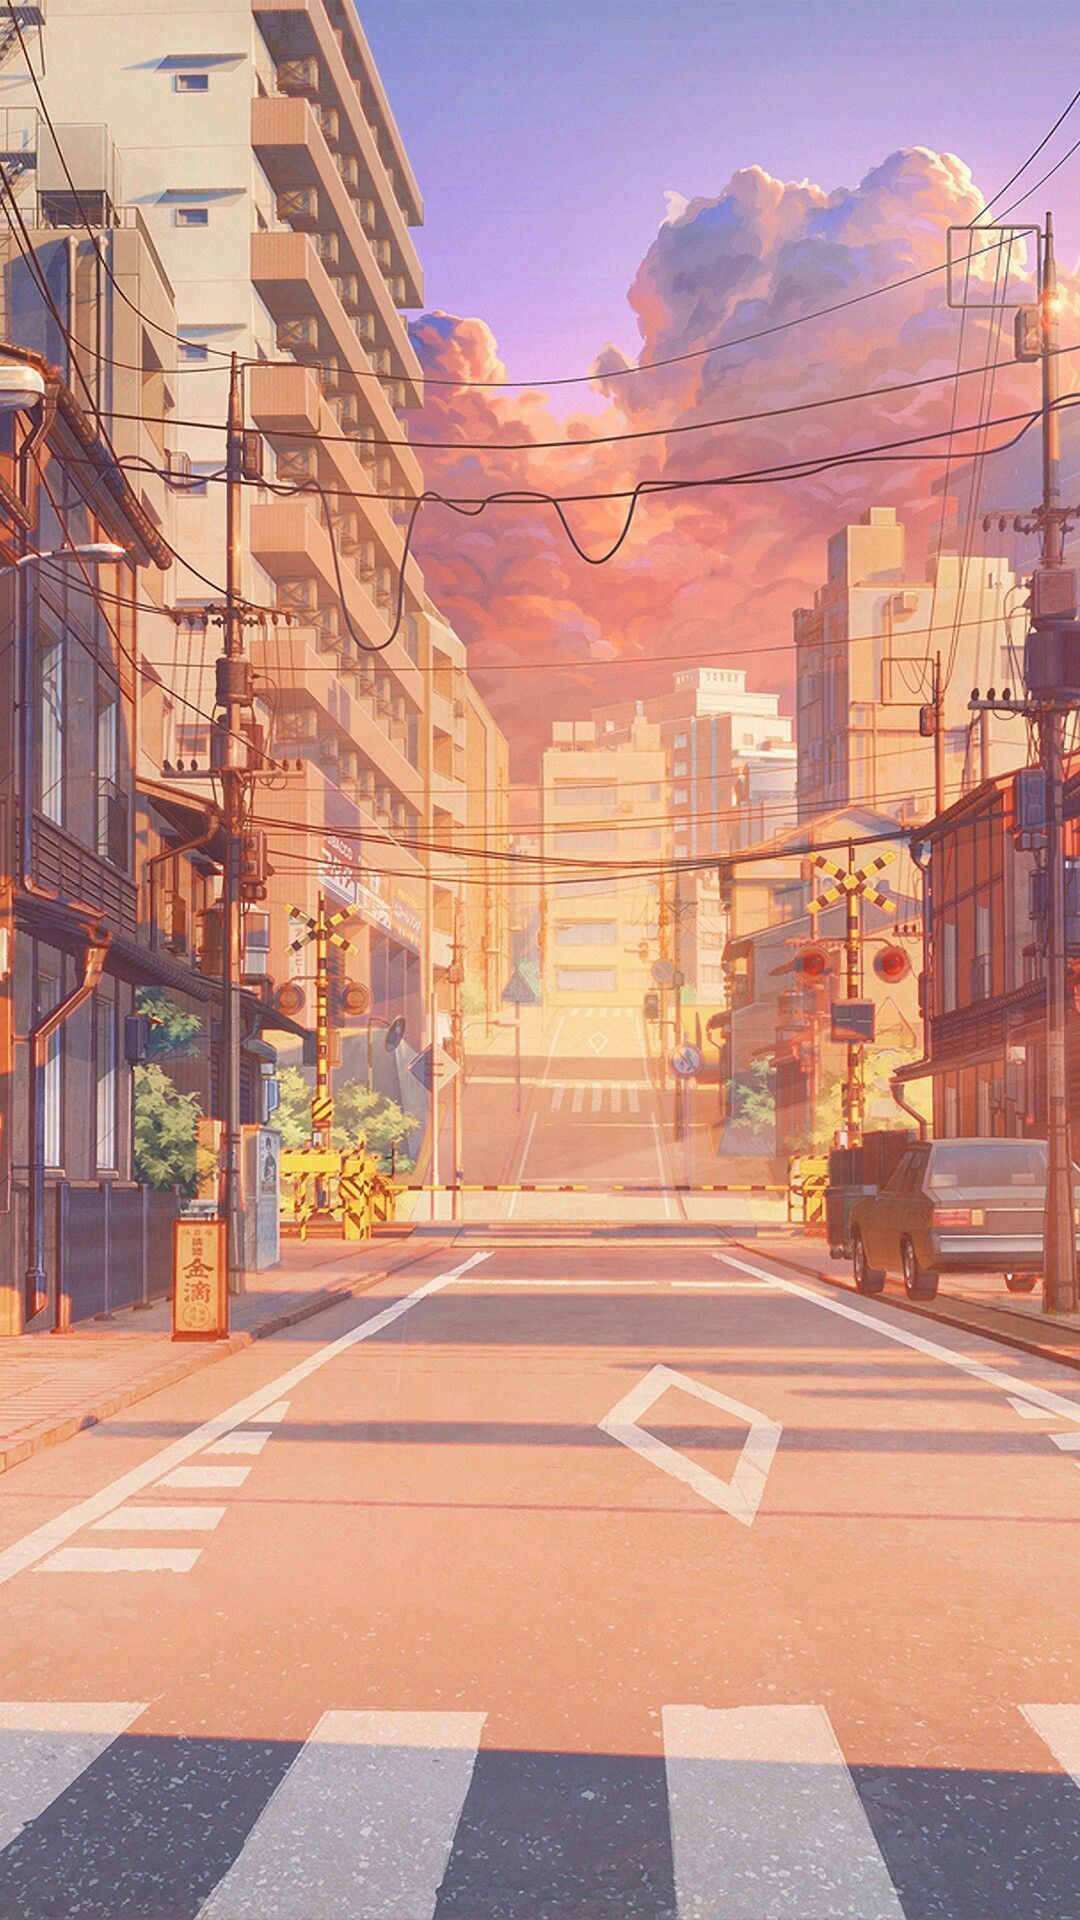 41+ Anime Landscape Wallpapers for iPhone and Android by Matthew Gonzales